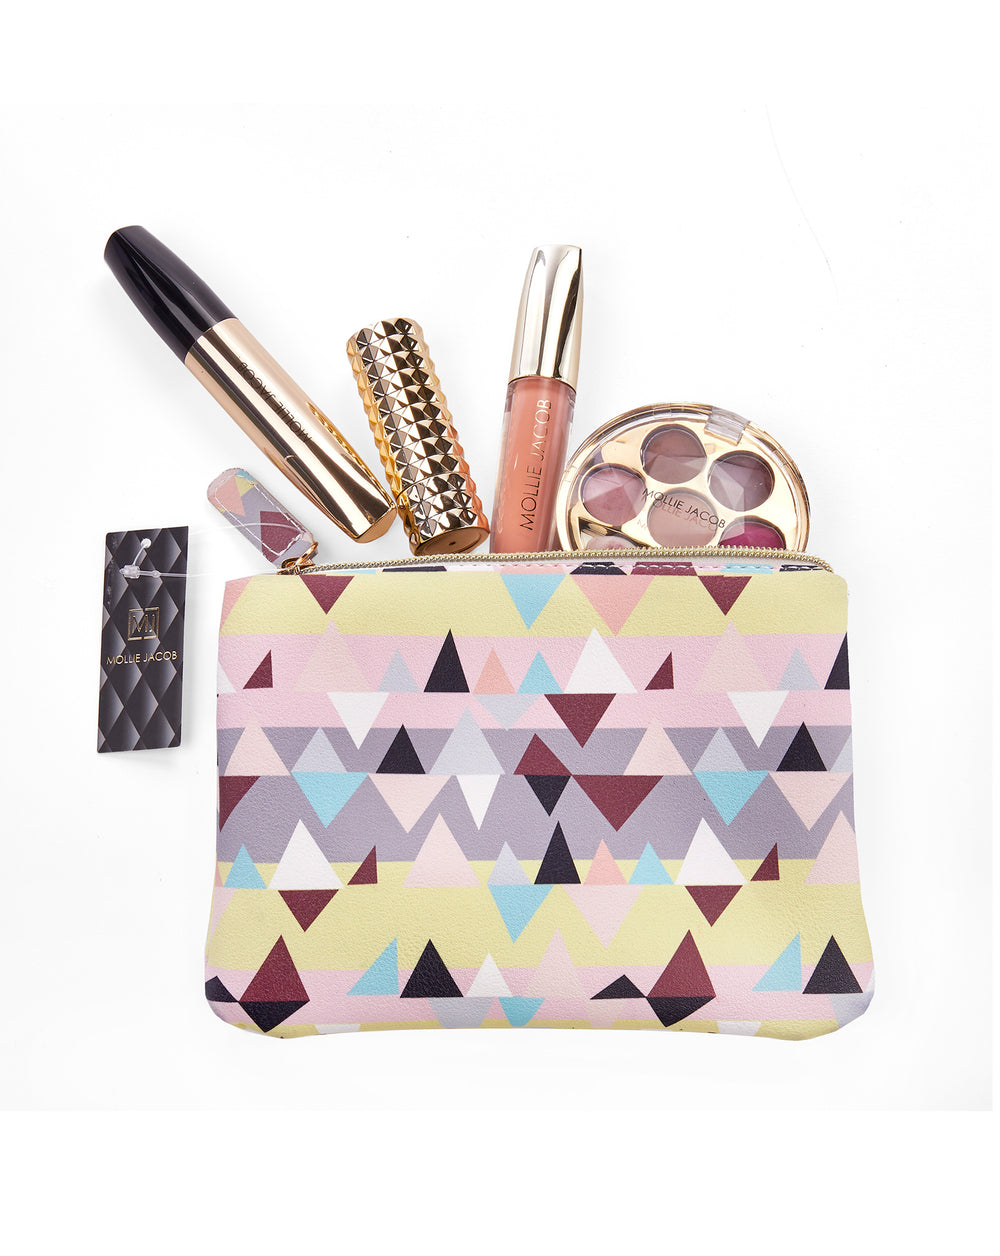 Aztec Chic Cosmetic Pouch